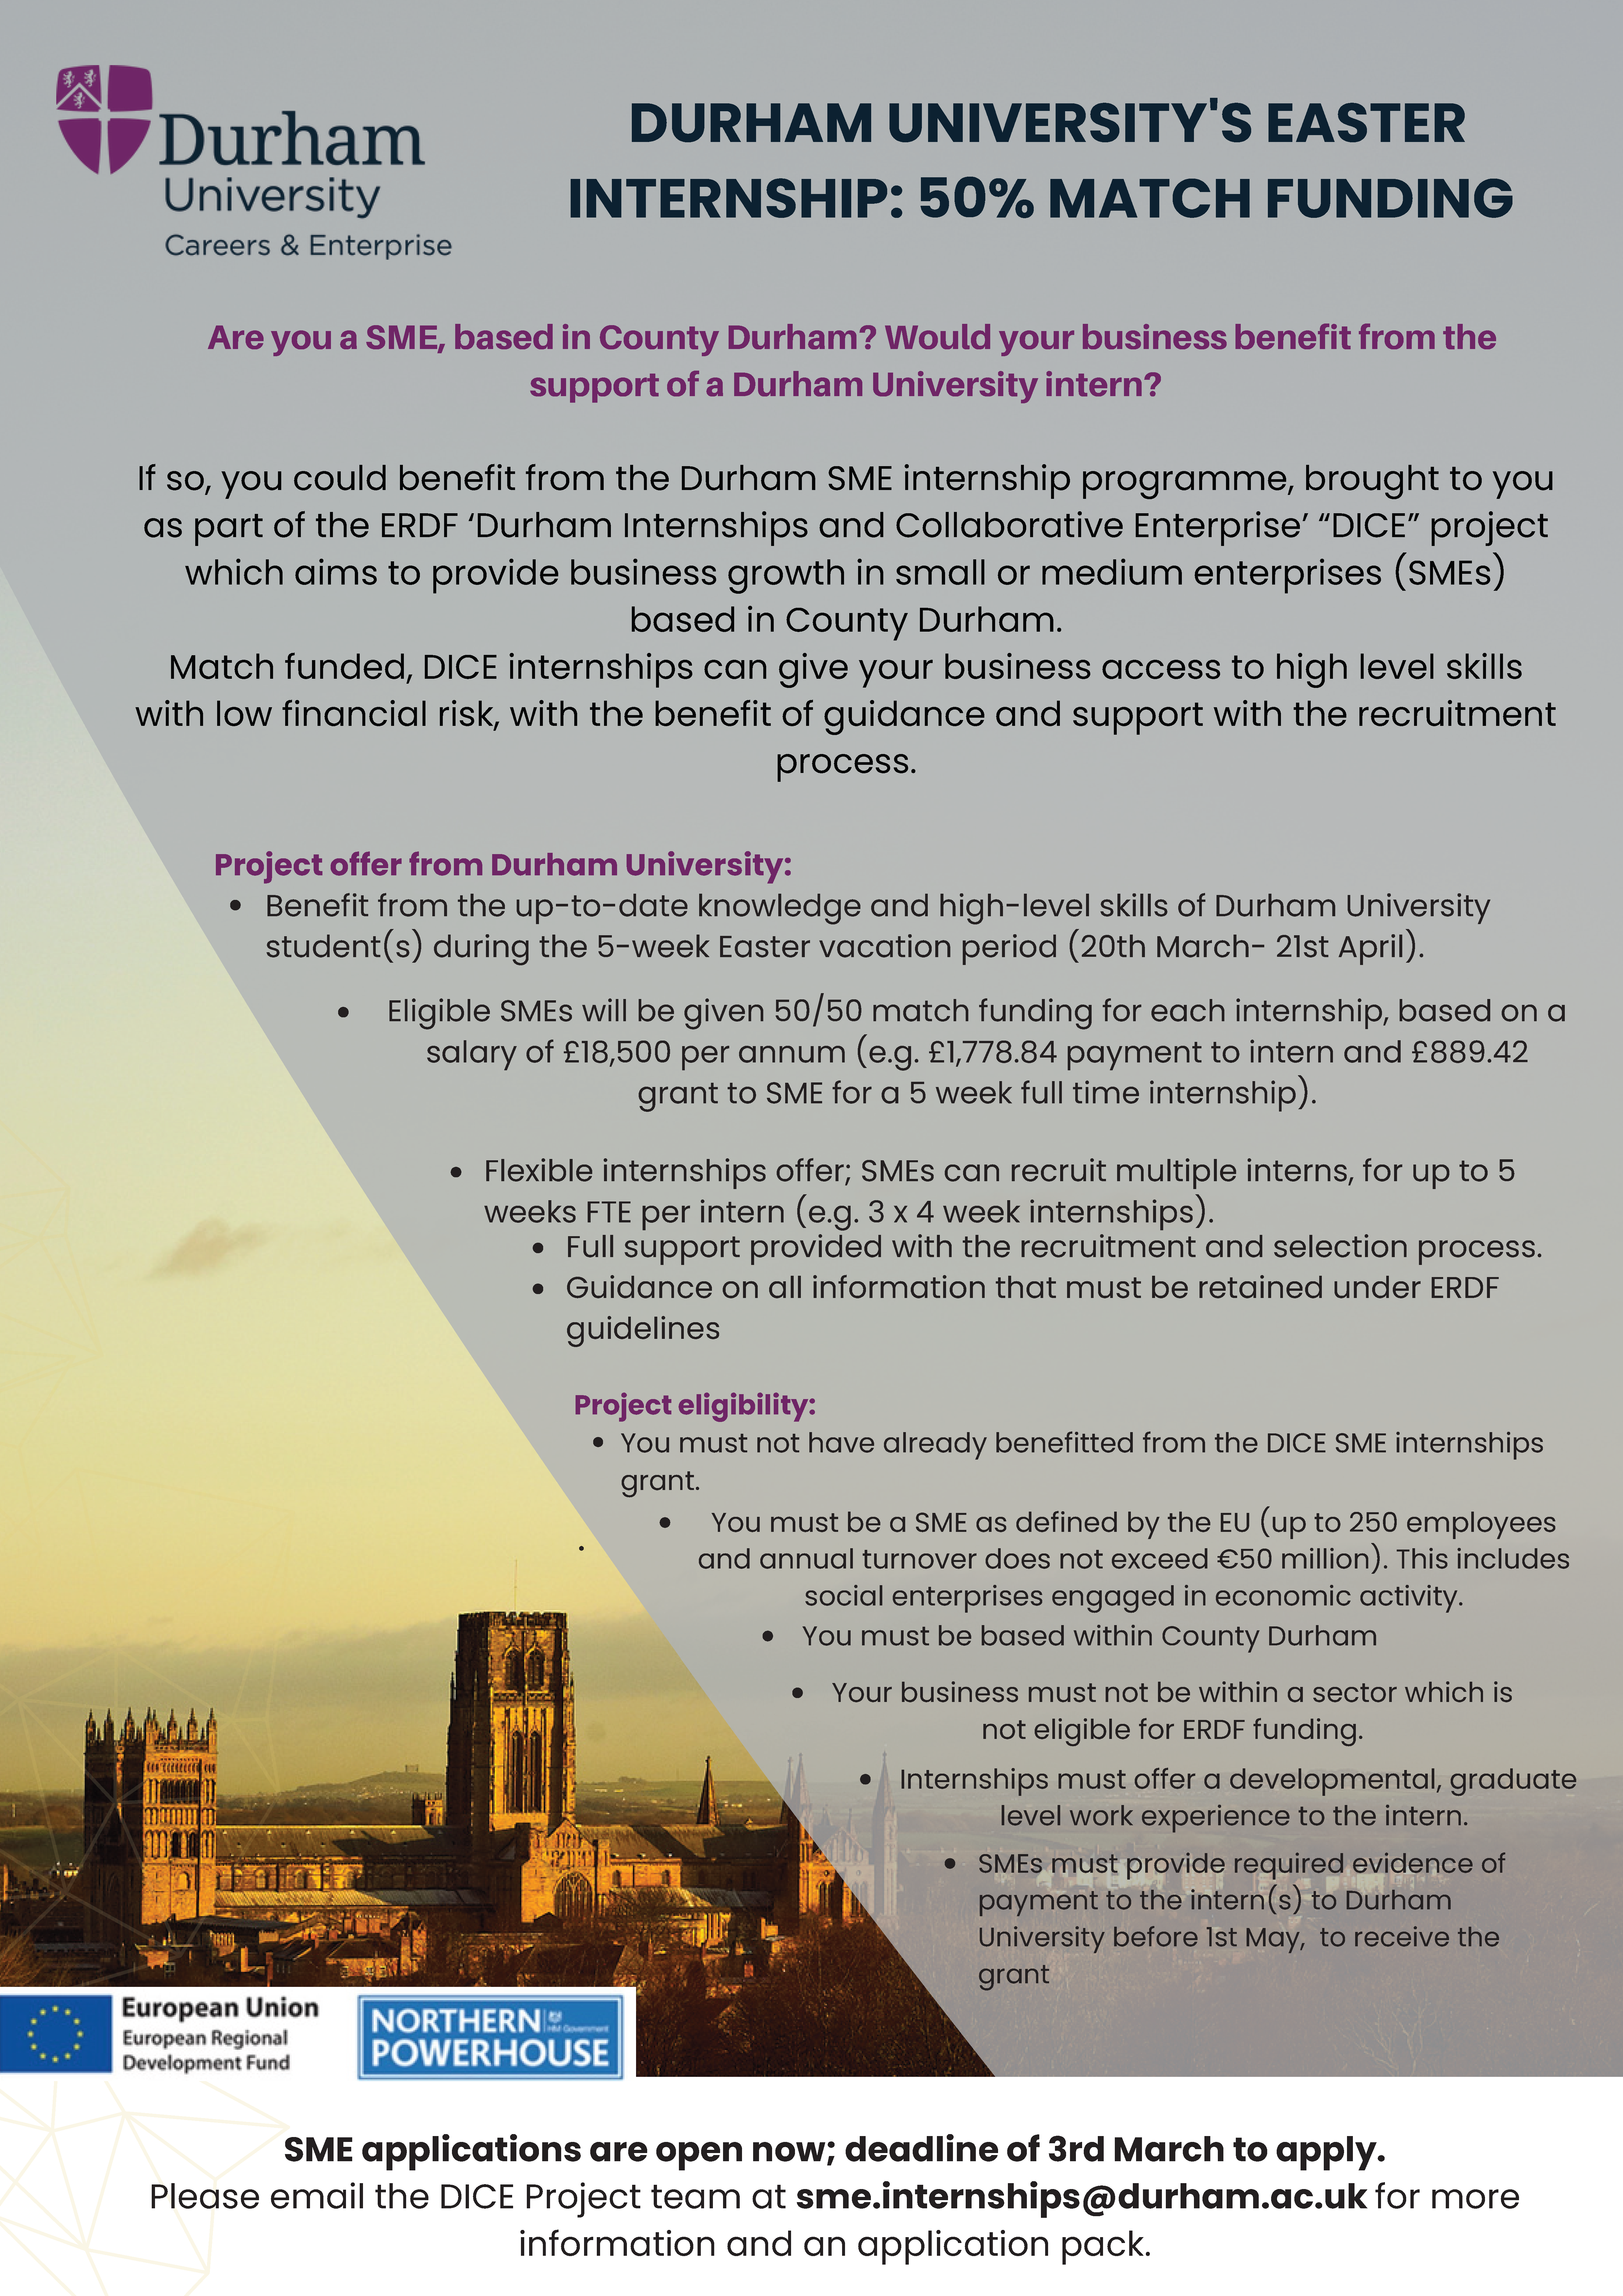 A Graphic detailing the Easter Match Funded Durham Internships Programme